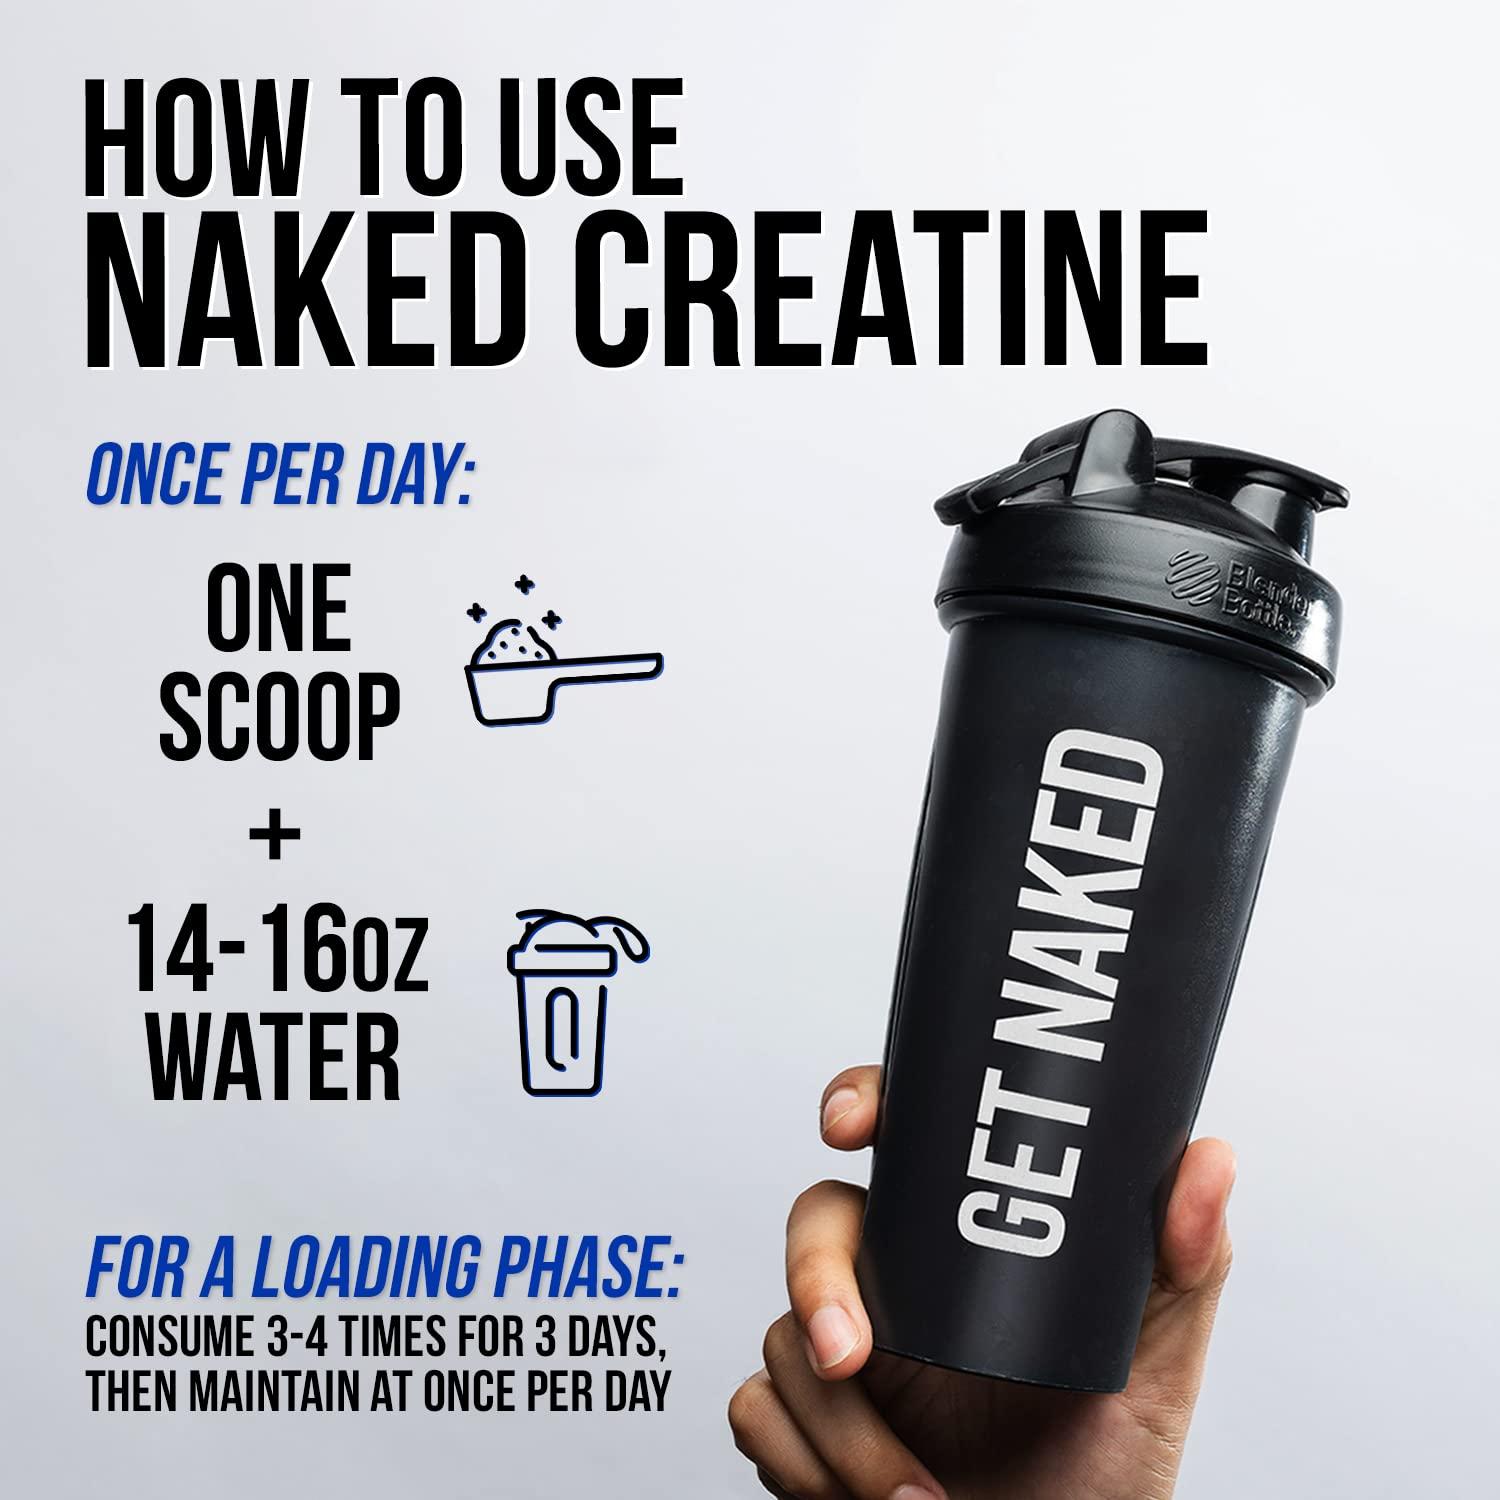 Naked Nutrition Pure Micronized Creatine Monohydrate - 100 Servings - 500 Grams, 1.1Lb Bulk, Vegan, Non-GMO, Gluten Free, Soy Free. Aid Strength Gains, No Artificial Ingredients - Naked Creatine